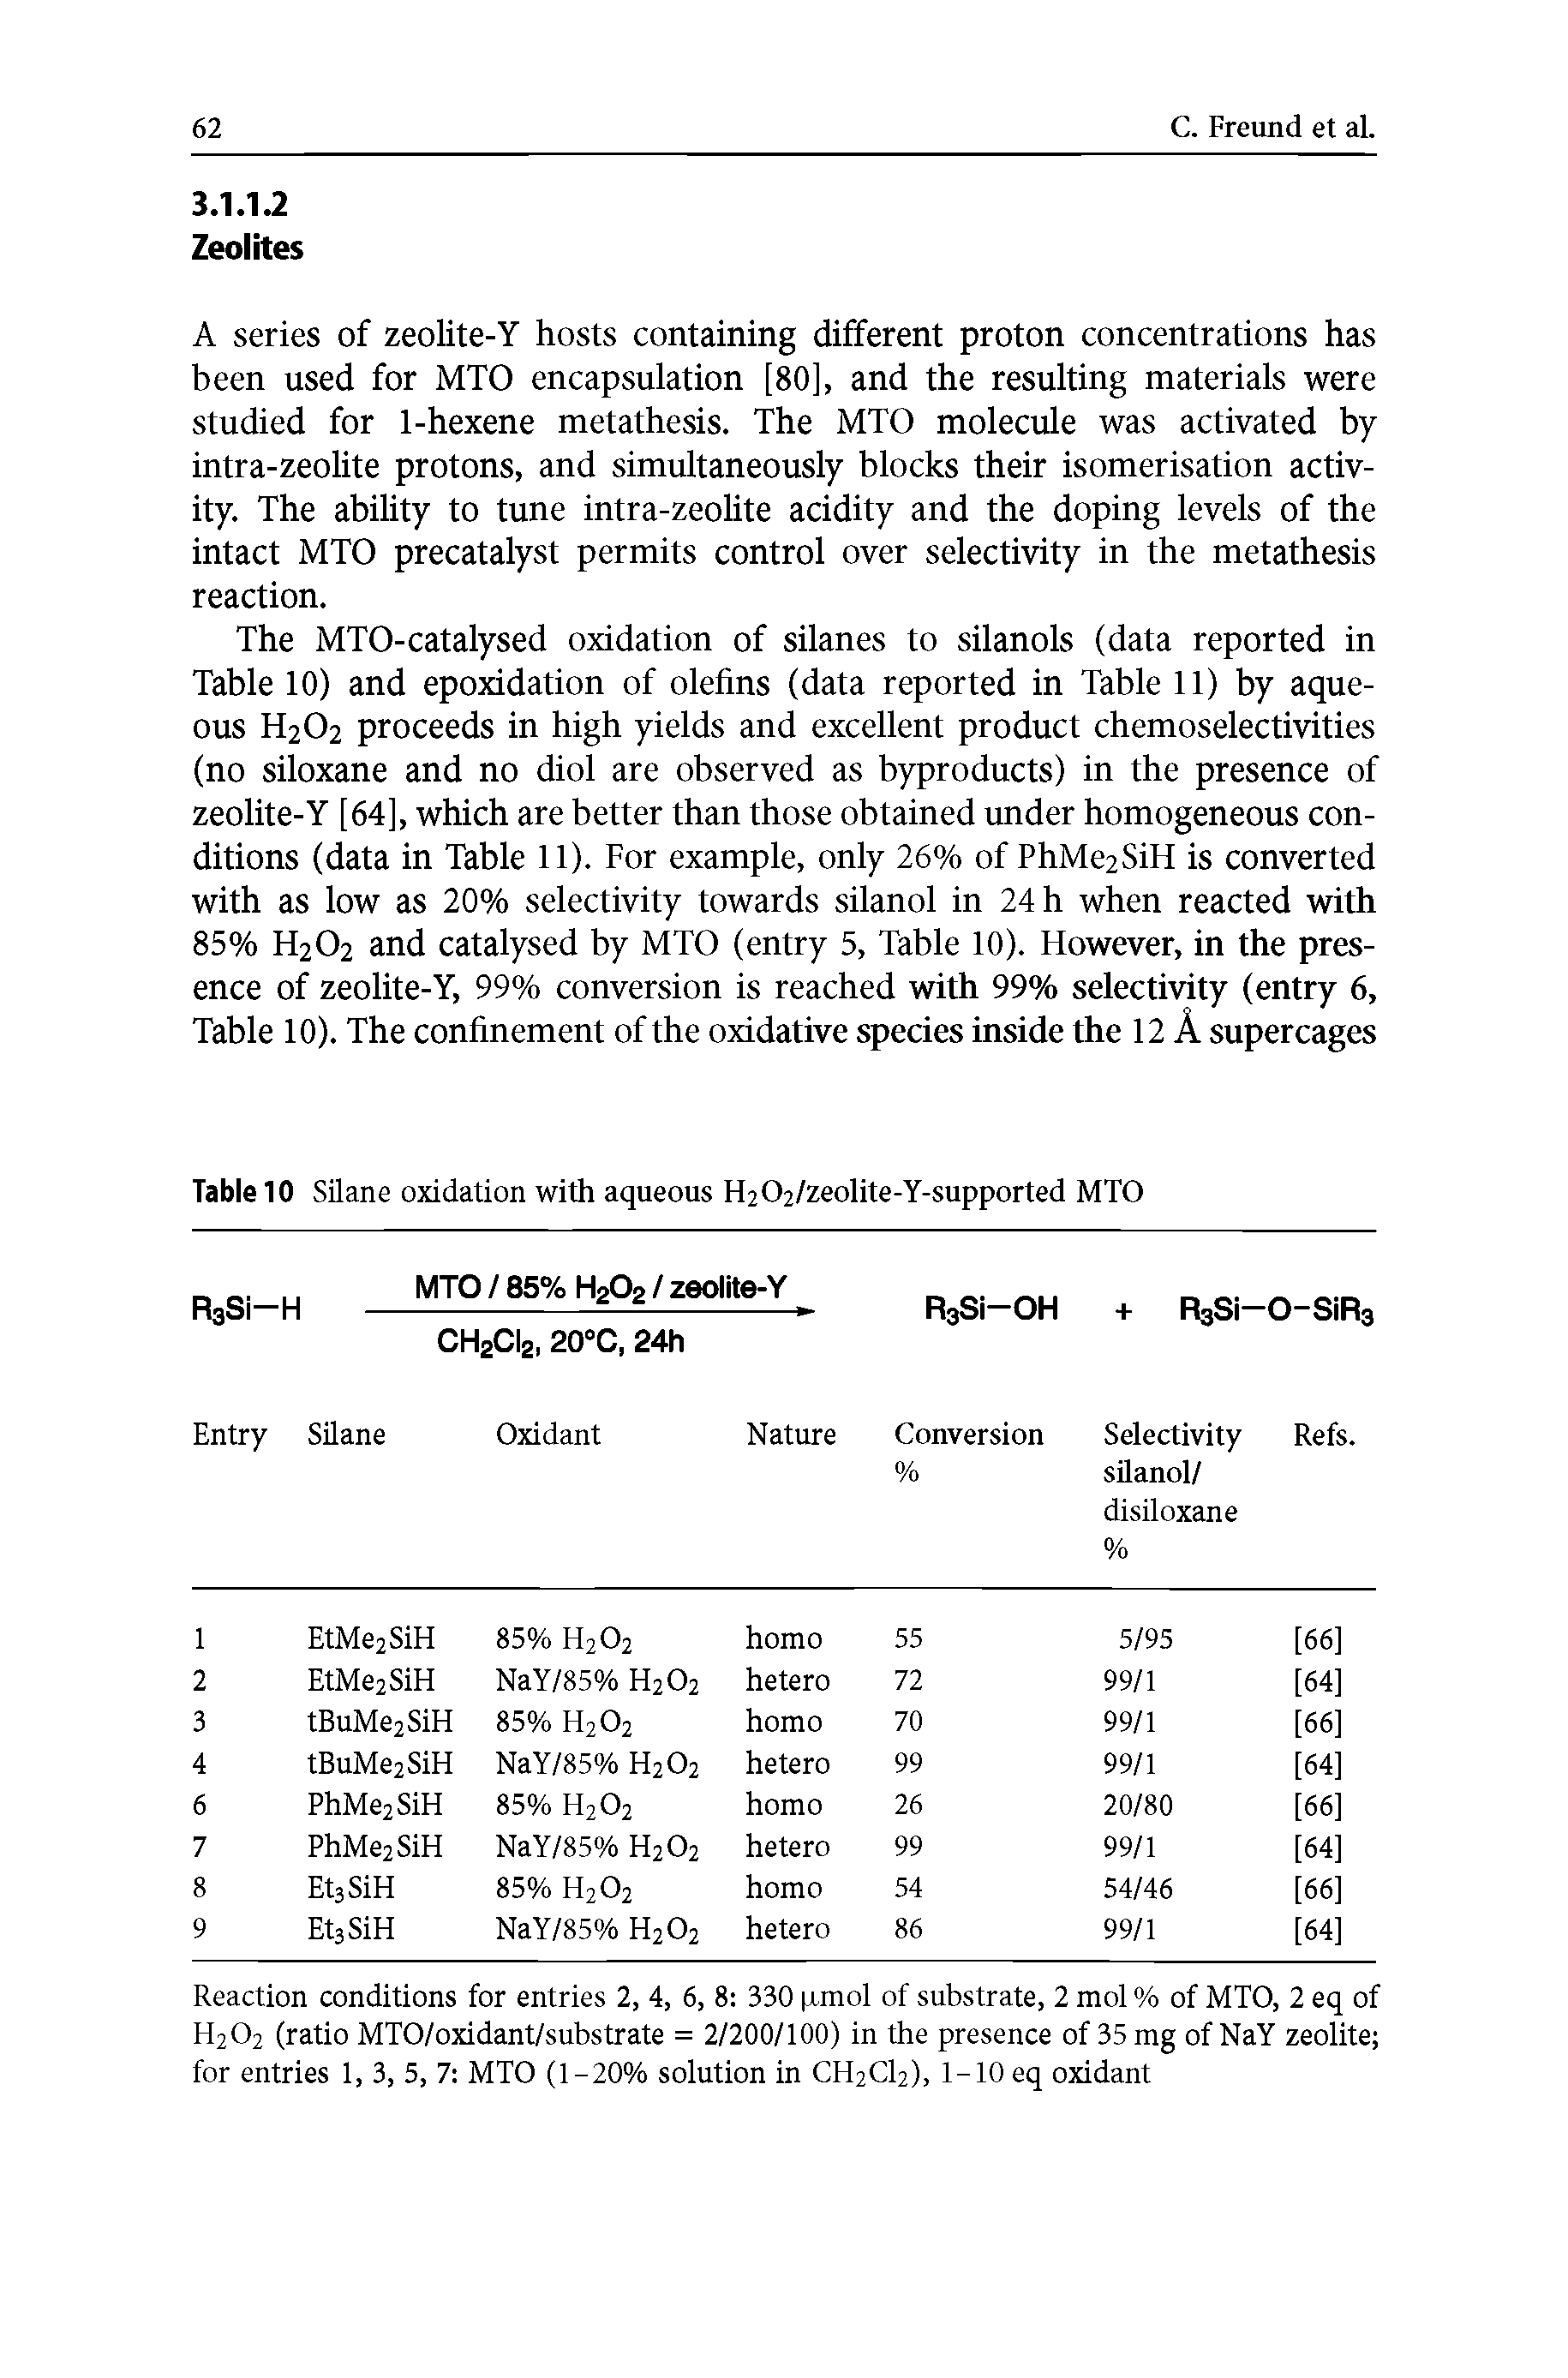 Table 10 Silane oxidation with aqueous H202/zeolite-Y-supported MTO...